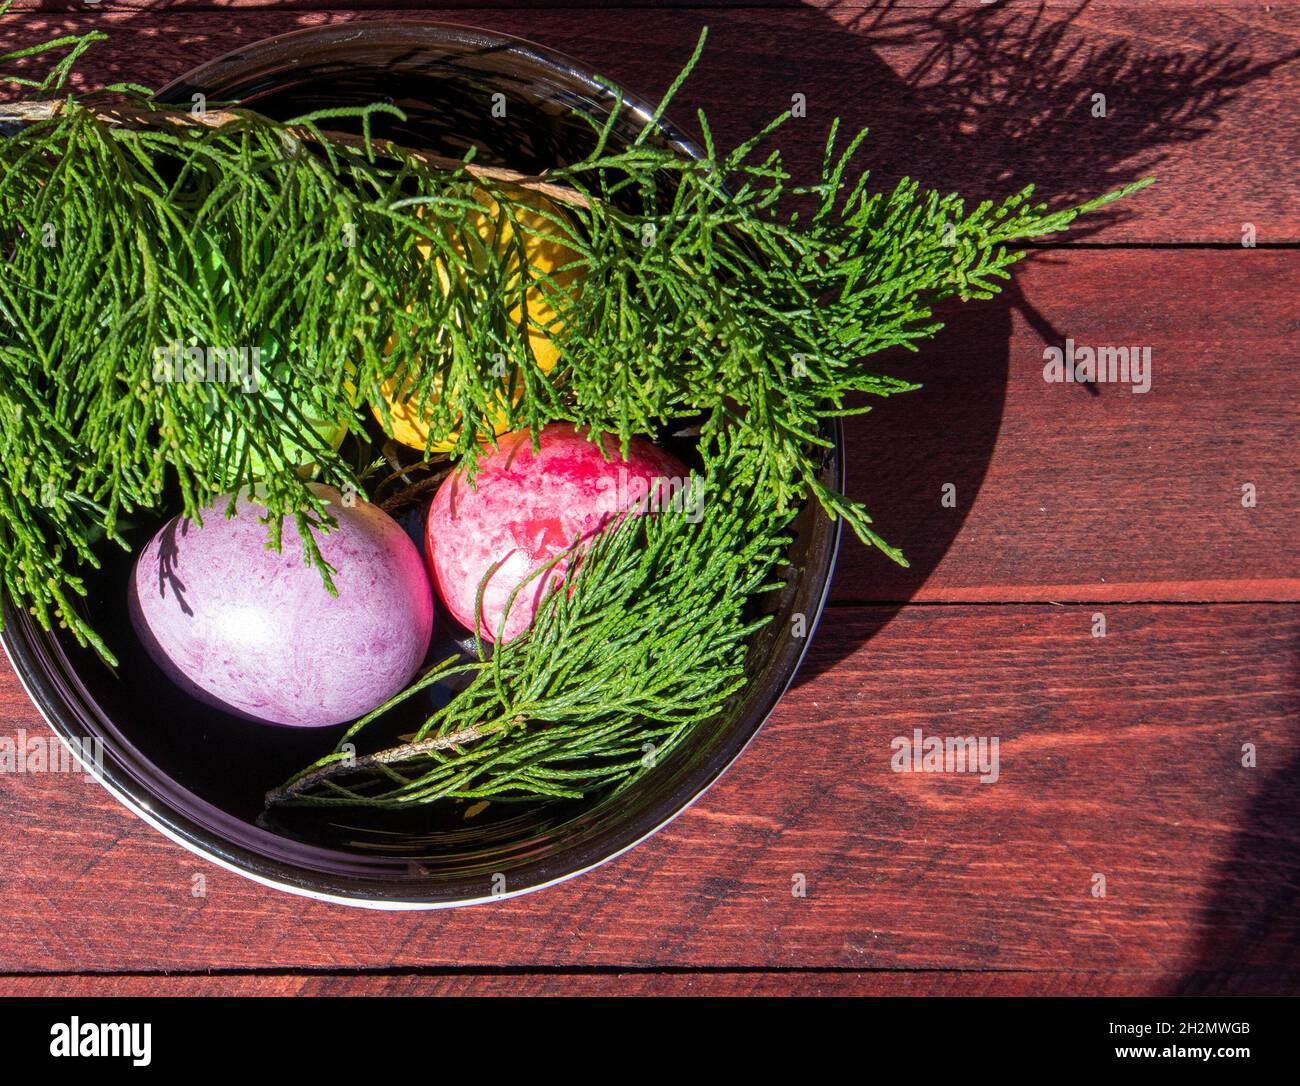 Four multicolored bright easter eggs in ceramic bowl staying on red wood surface Stock Photo